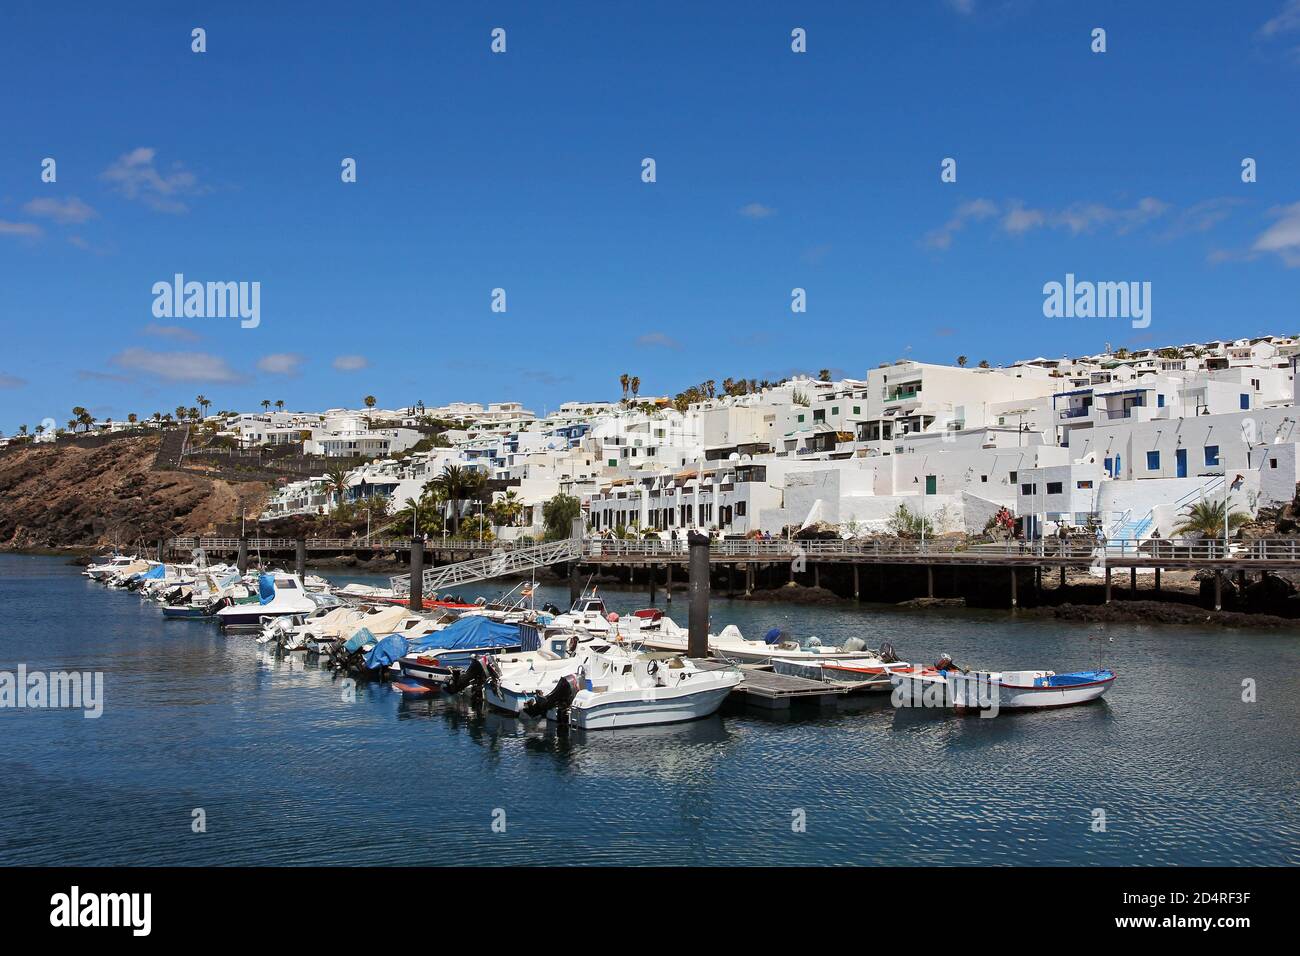 Marina in Puerto del Carmen, in the south of Lanzarote Island in the Canaries Archipelago, Spain Stock Photo